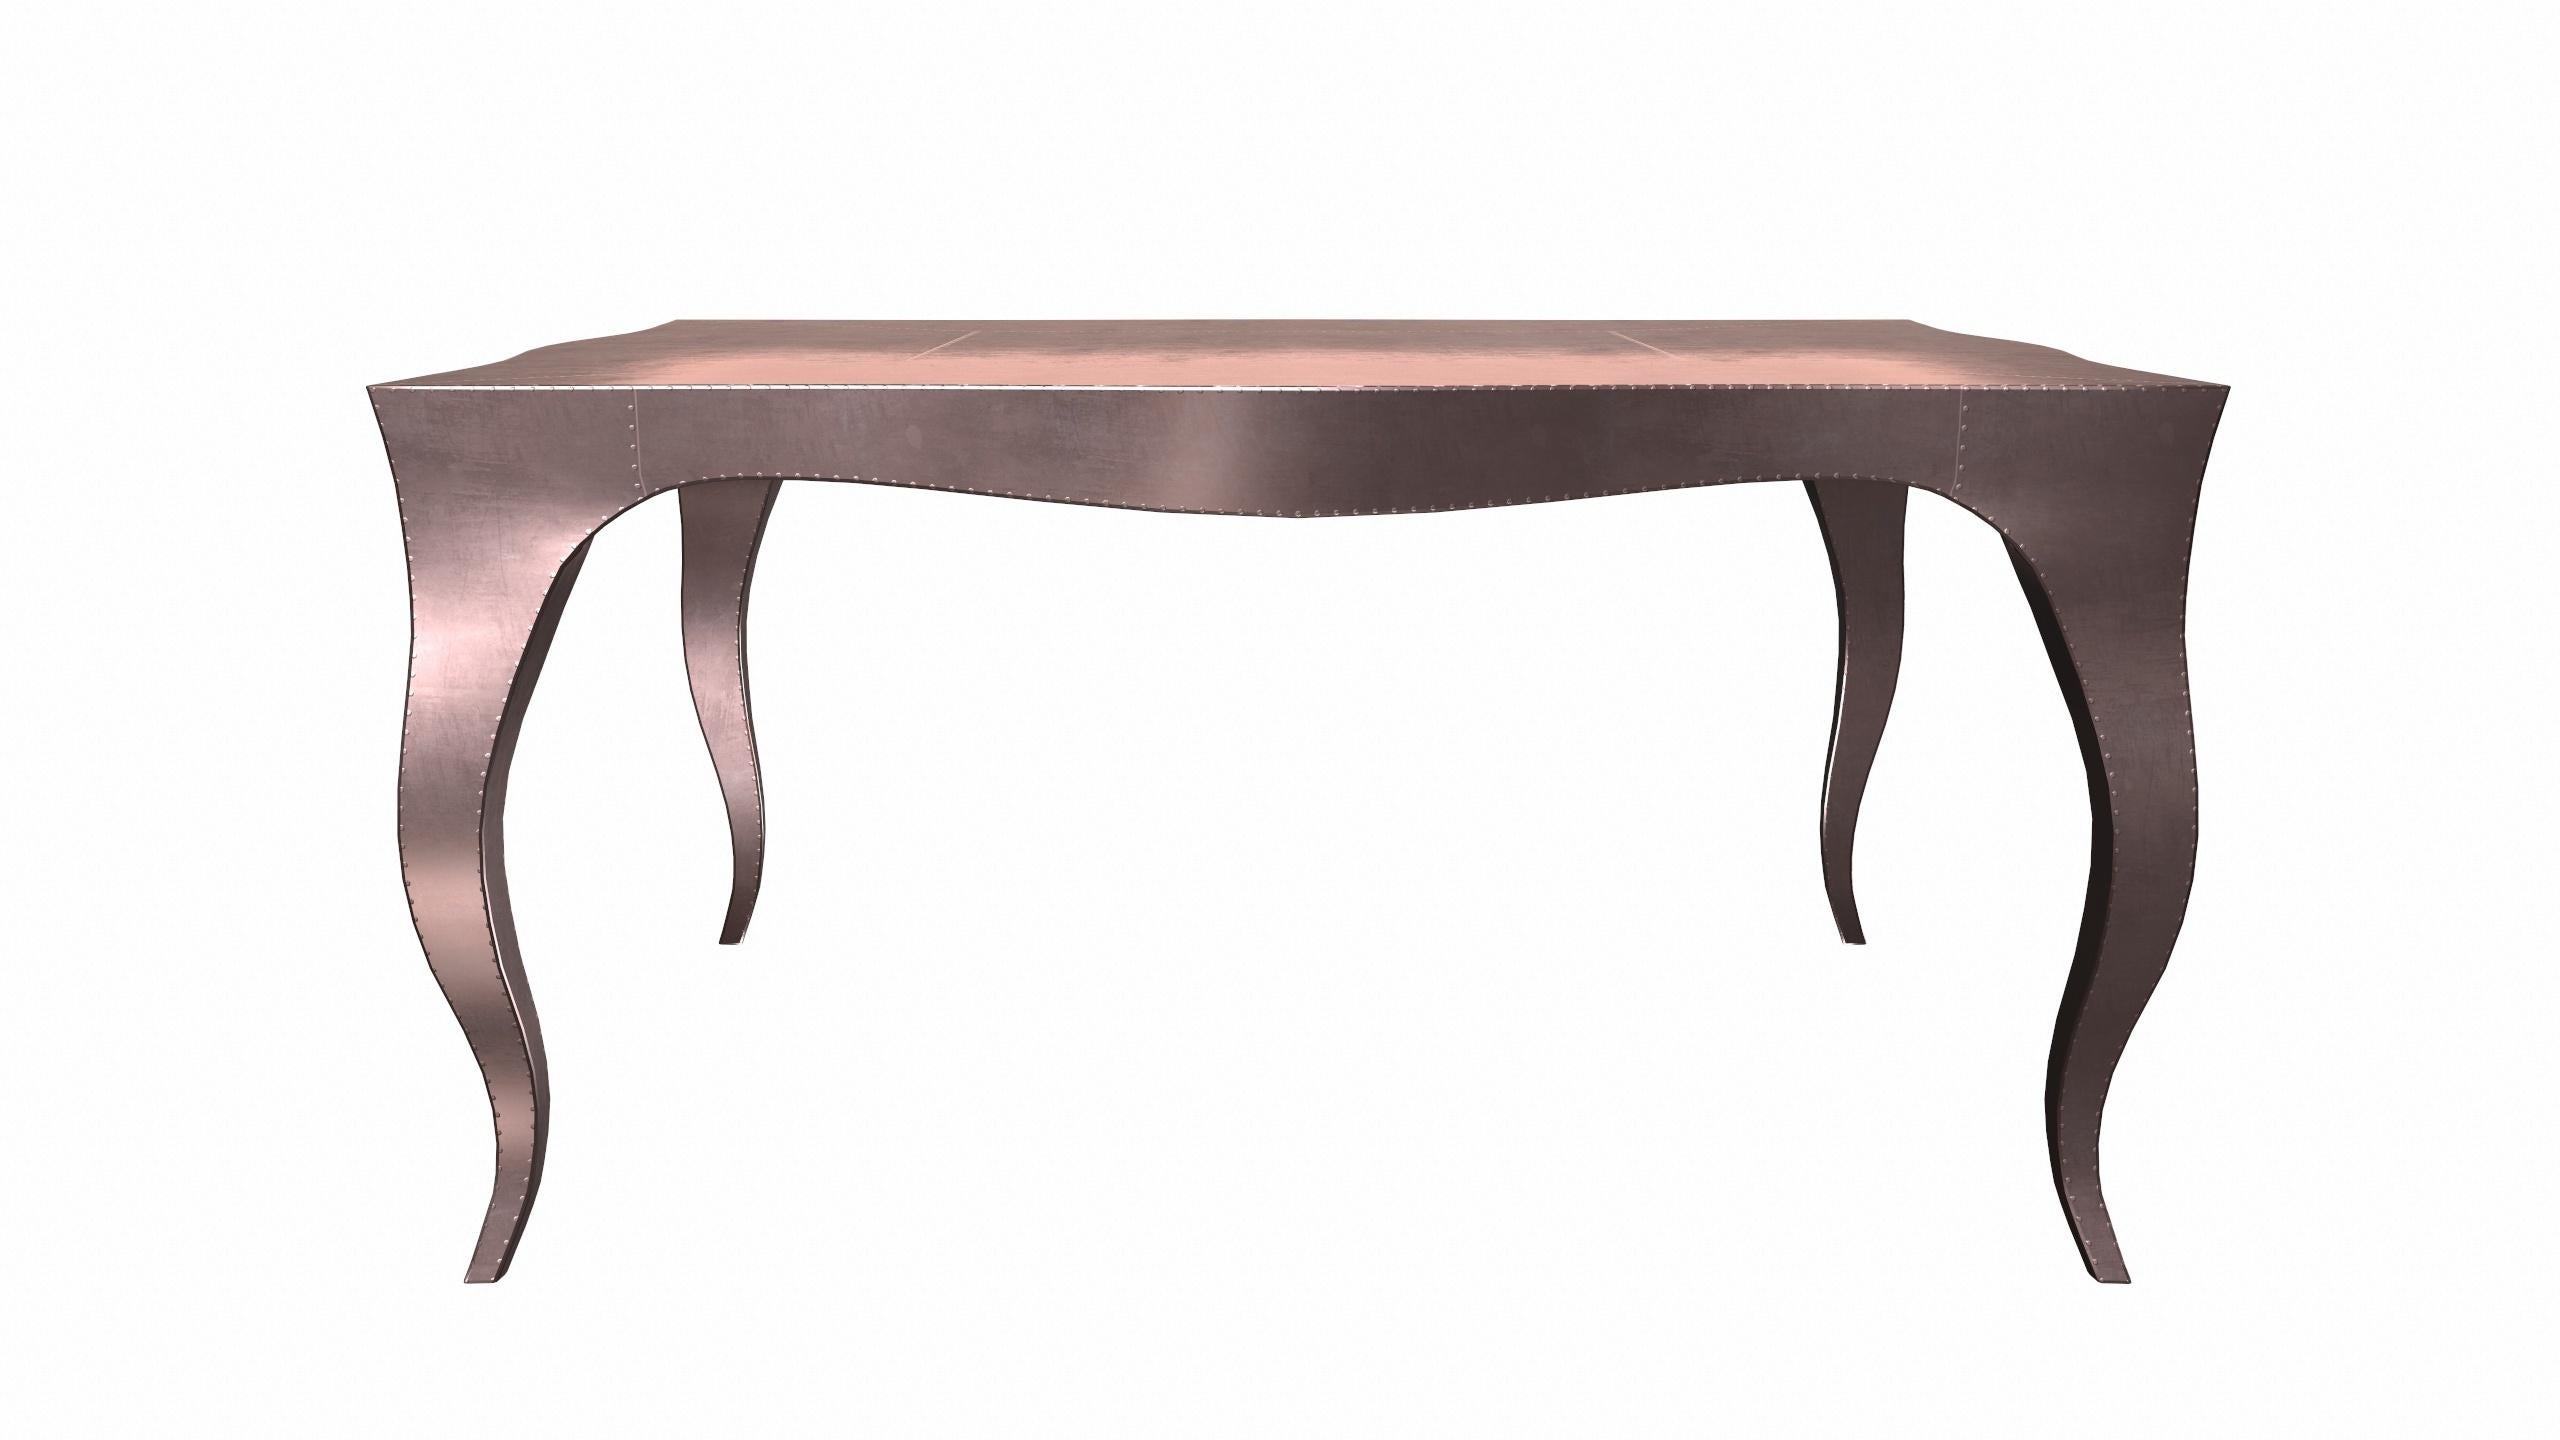 Hand-Carved Louise Art Deco Industrial and Work Tables Smooth Copper by Paul Mathieu For Sale